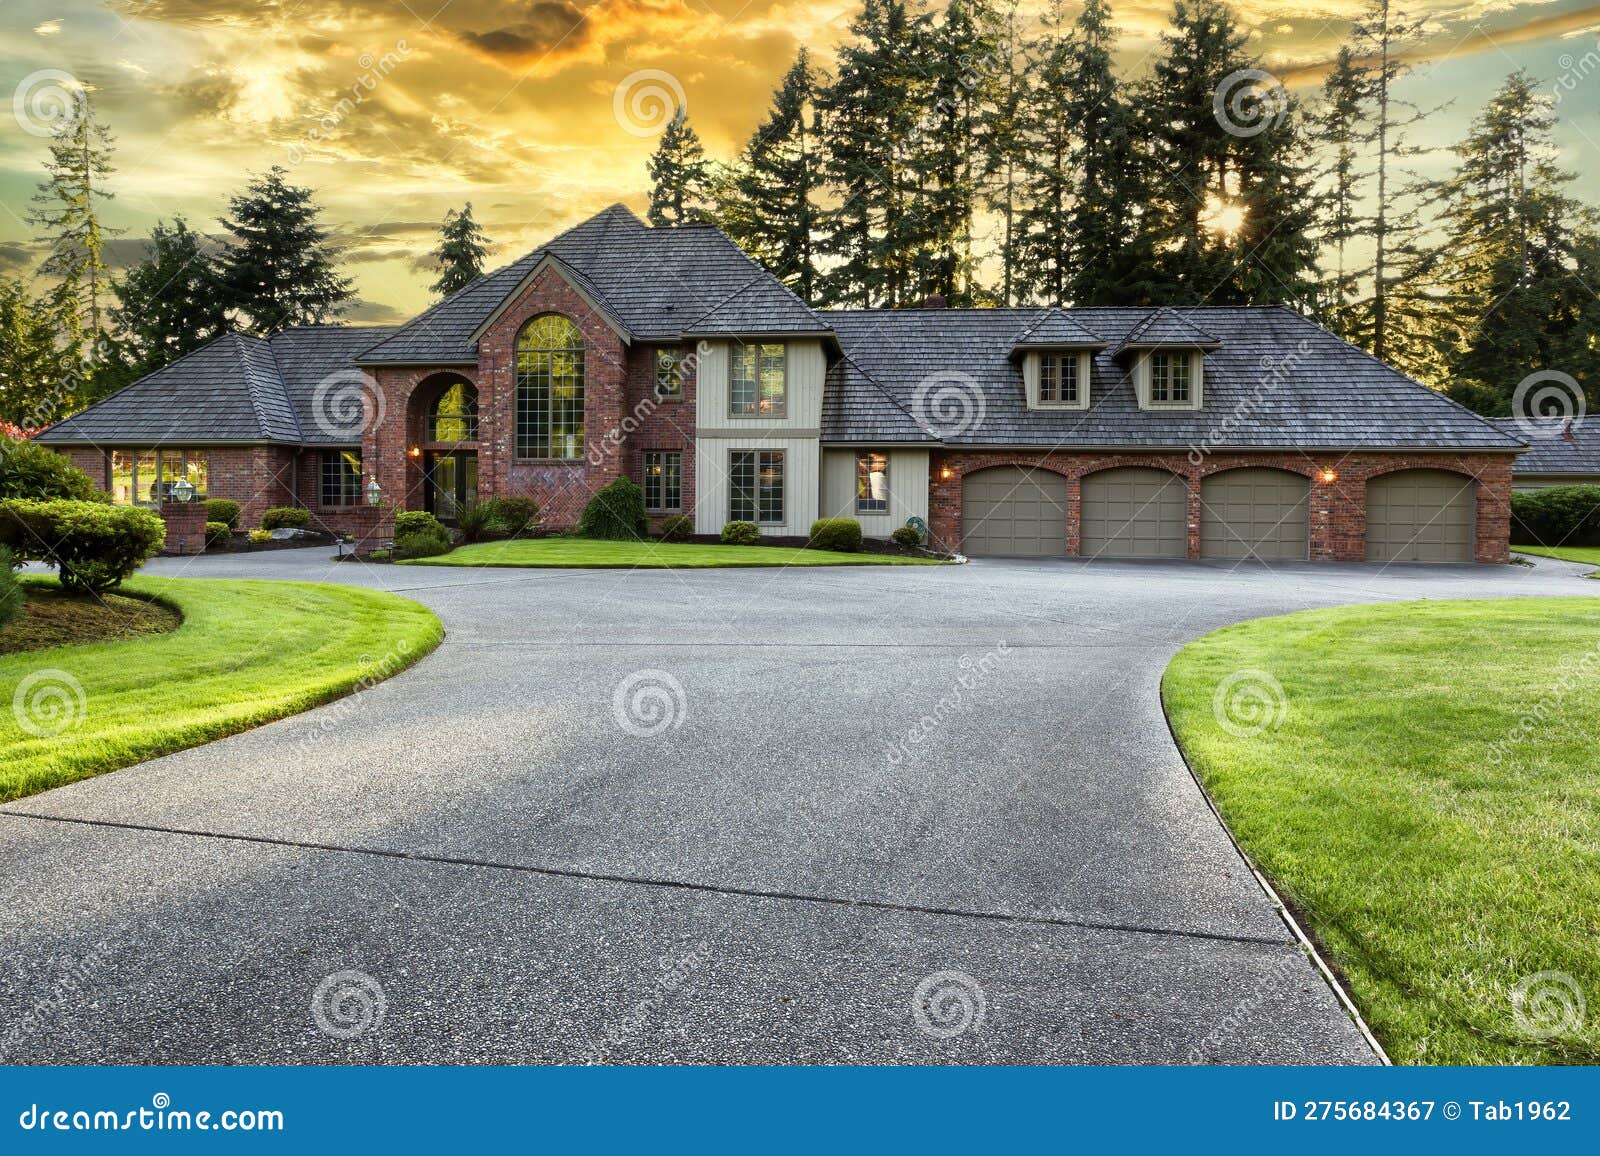 Beautiful Luxury Home Exterior In Early Evening During Golden Sunset